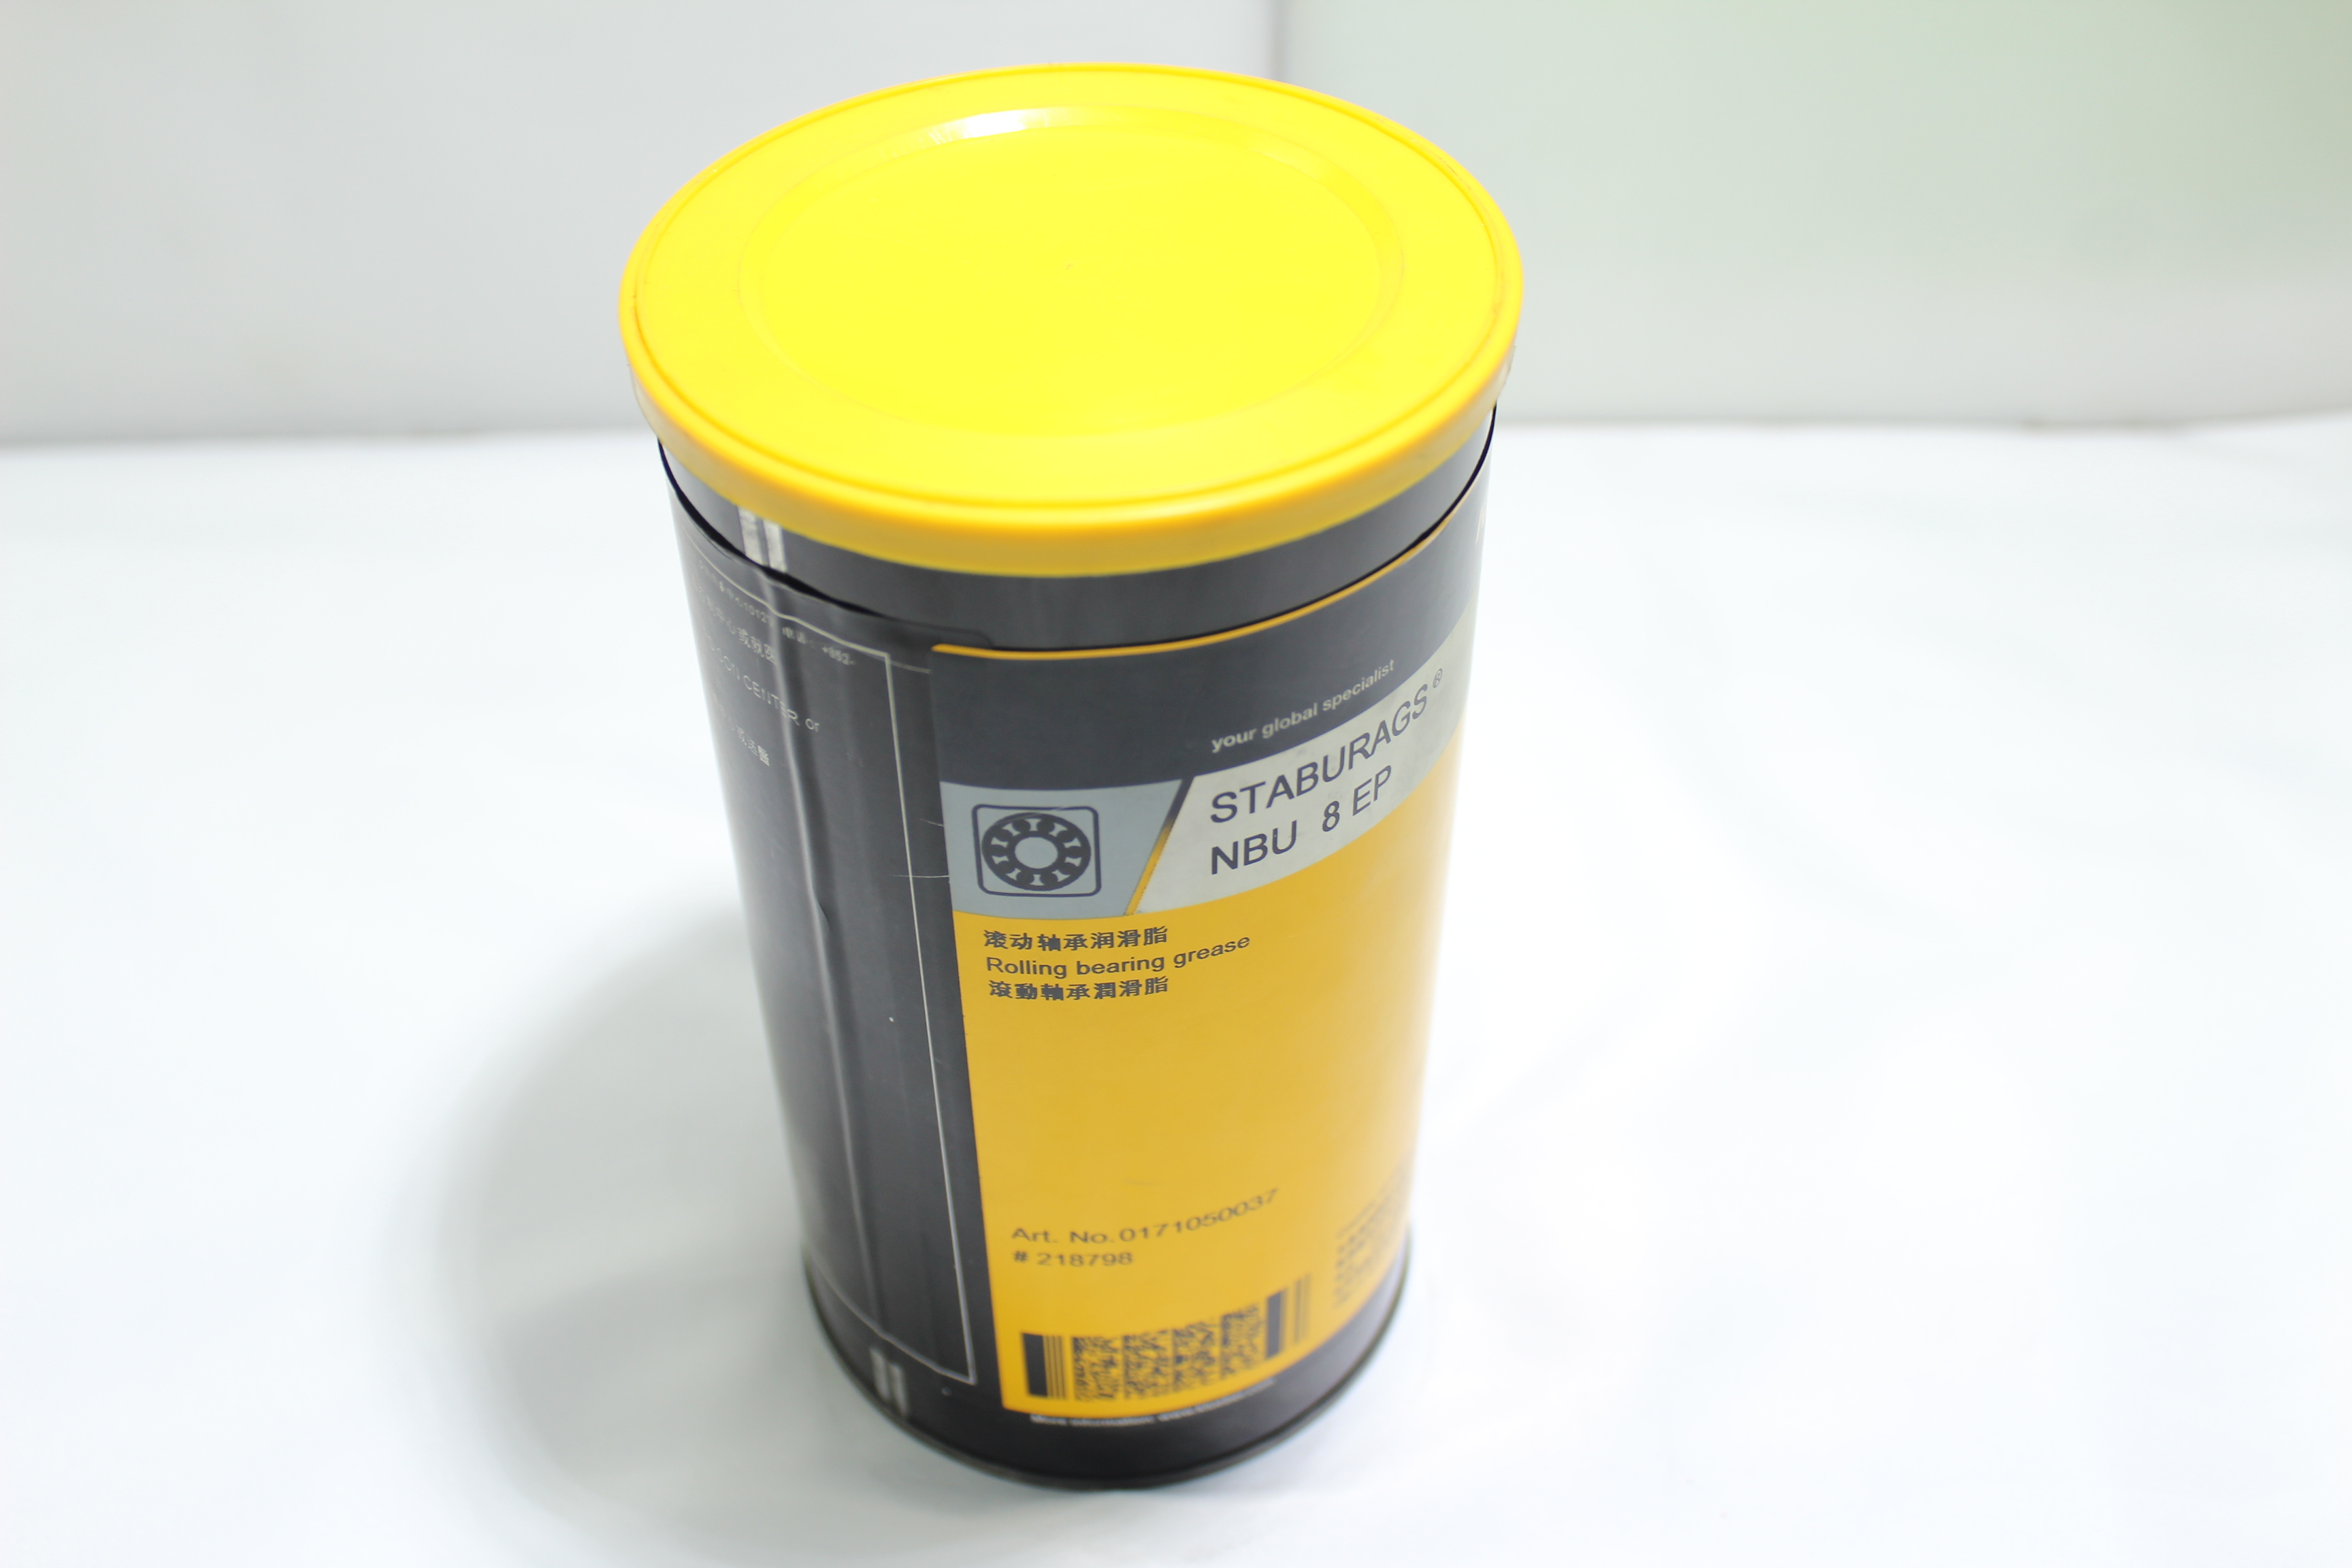 STABURAGS NBU 8 EP 1KG Grease for Machinery Production Line